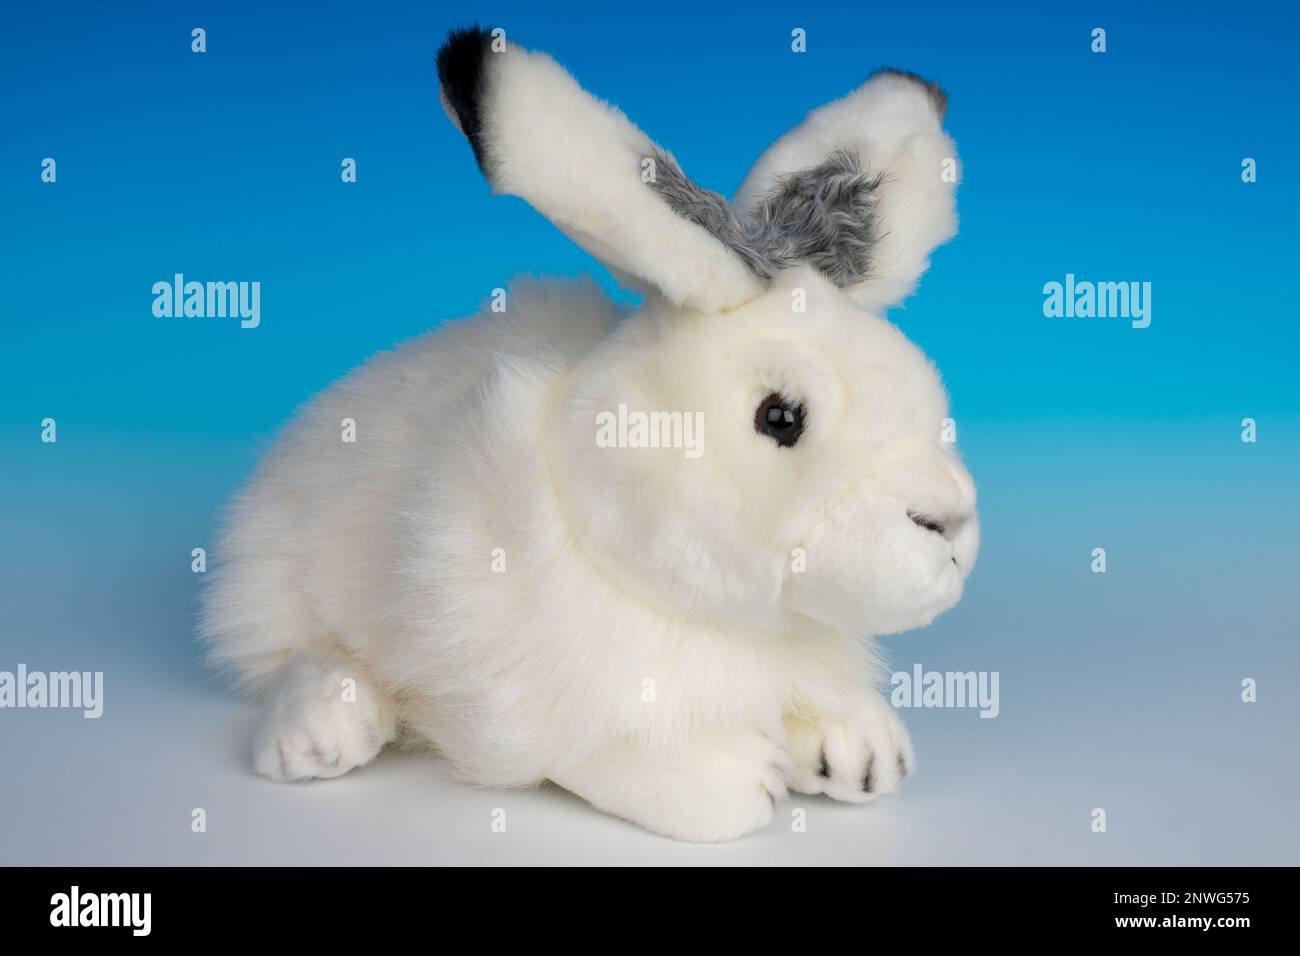 Arctic Hare stuffed animal on a blue and white seamless background. Stock Photo